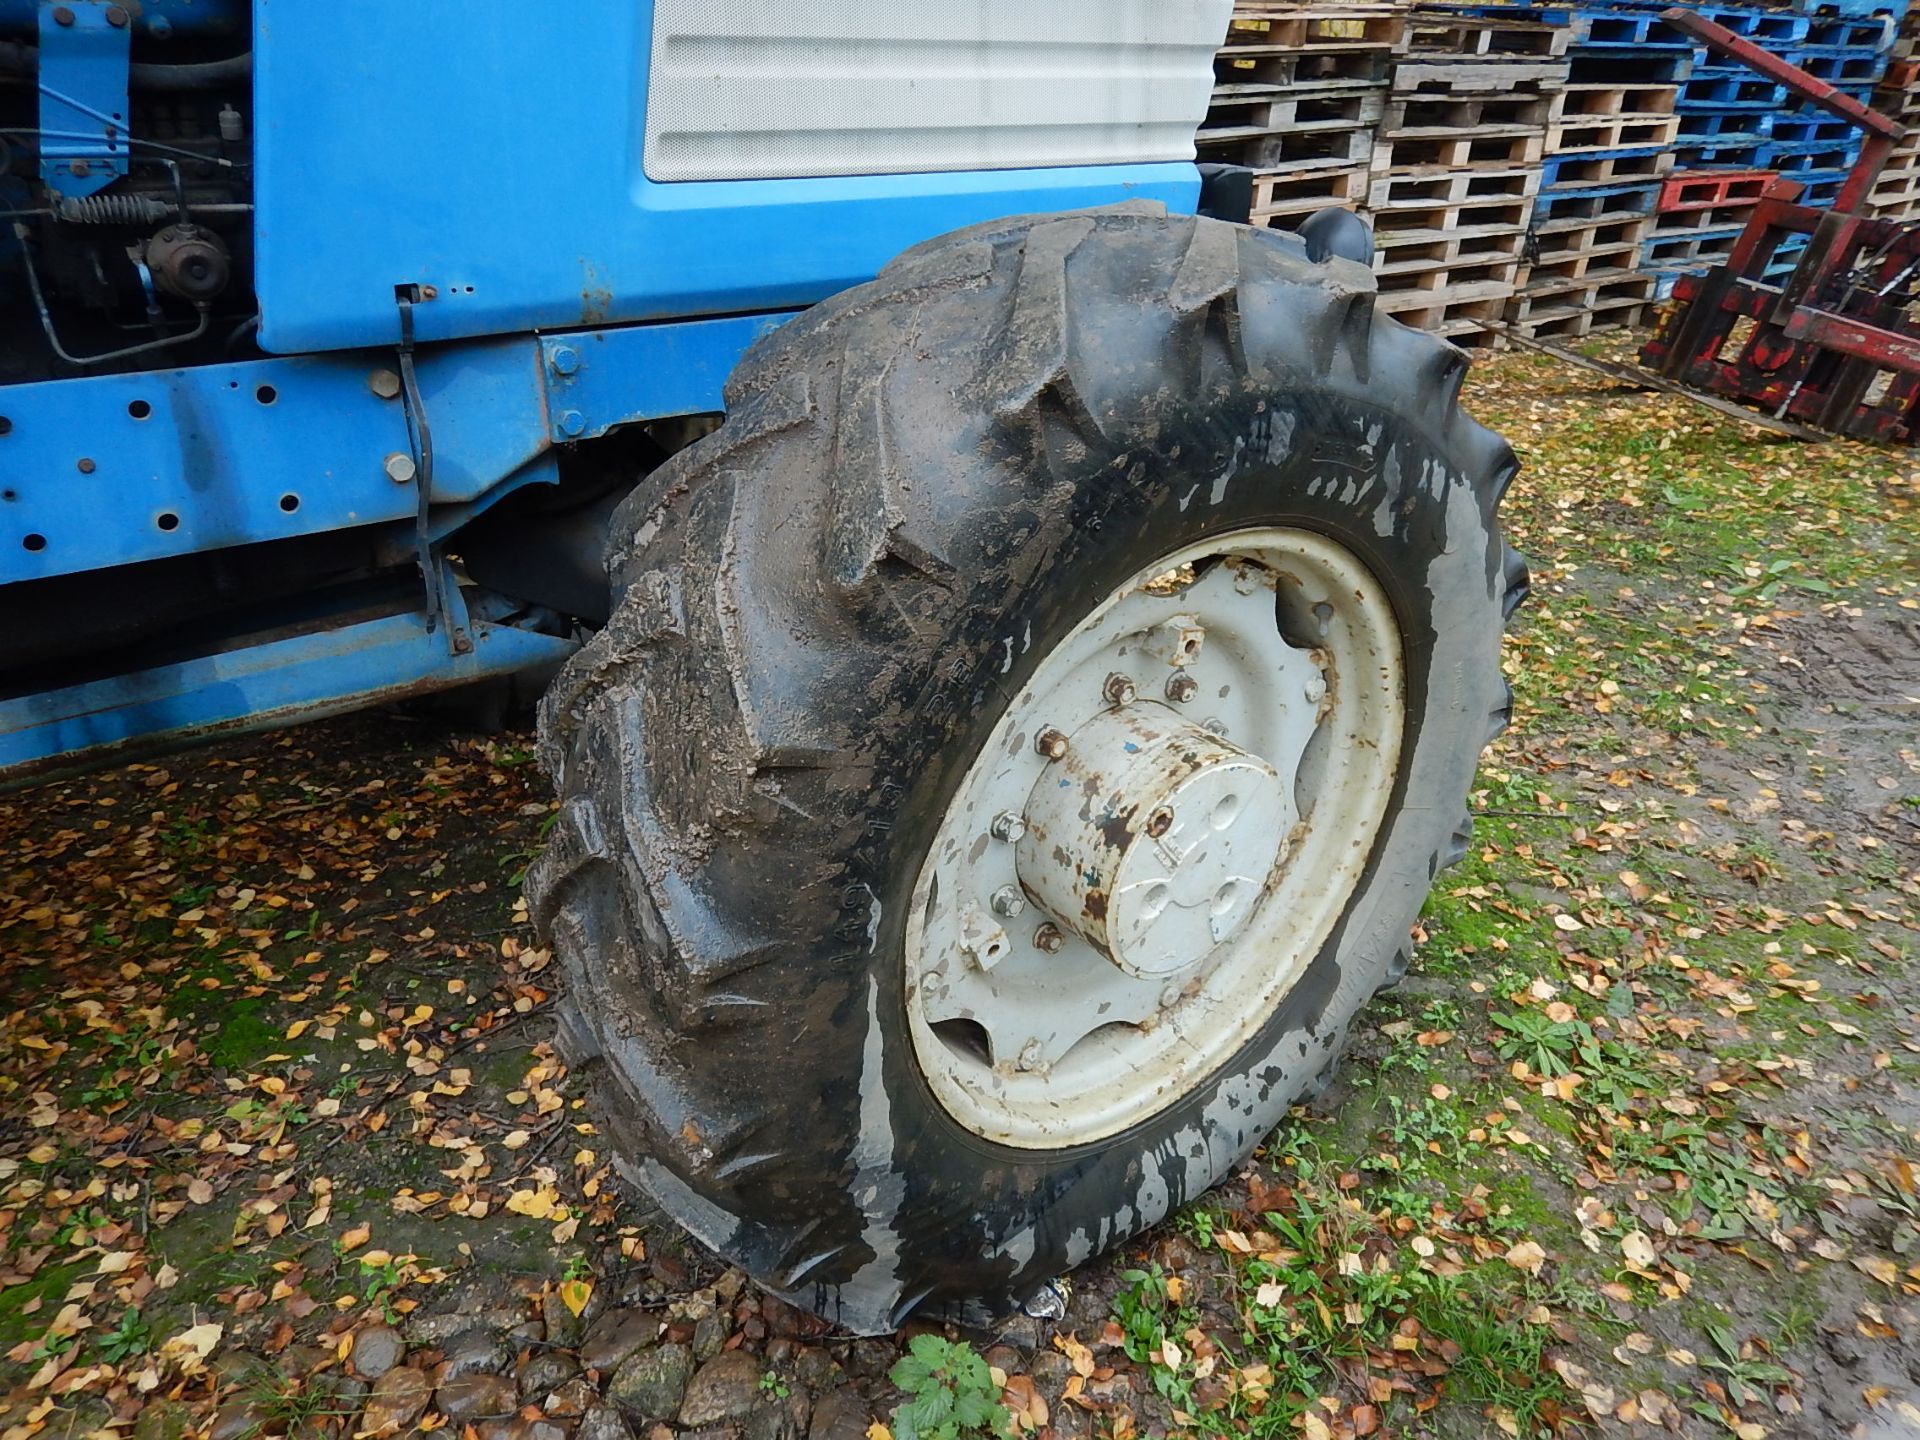 1985 FORD TW-25 4wd TRACTOR Fitted with front underslung weight, rear inside wheel weights, Q cab - Image 8 of 12